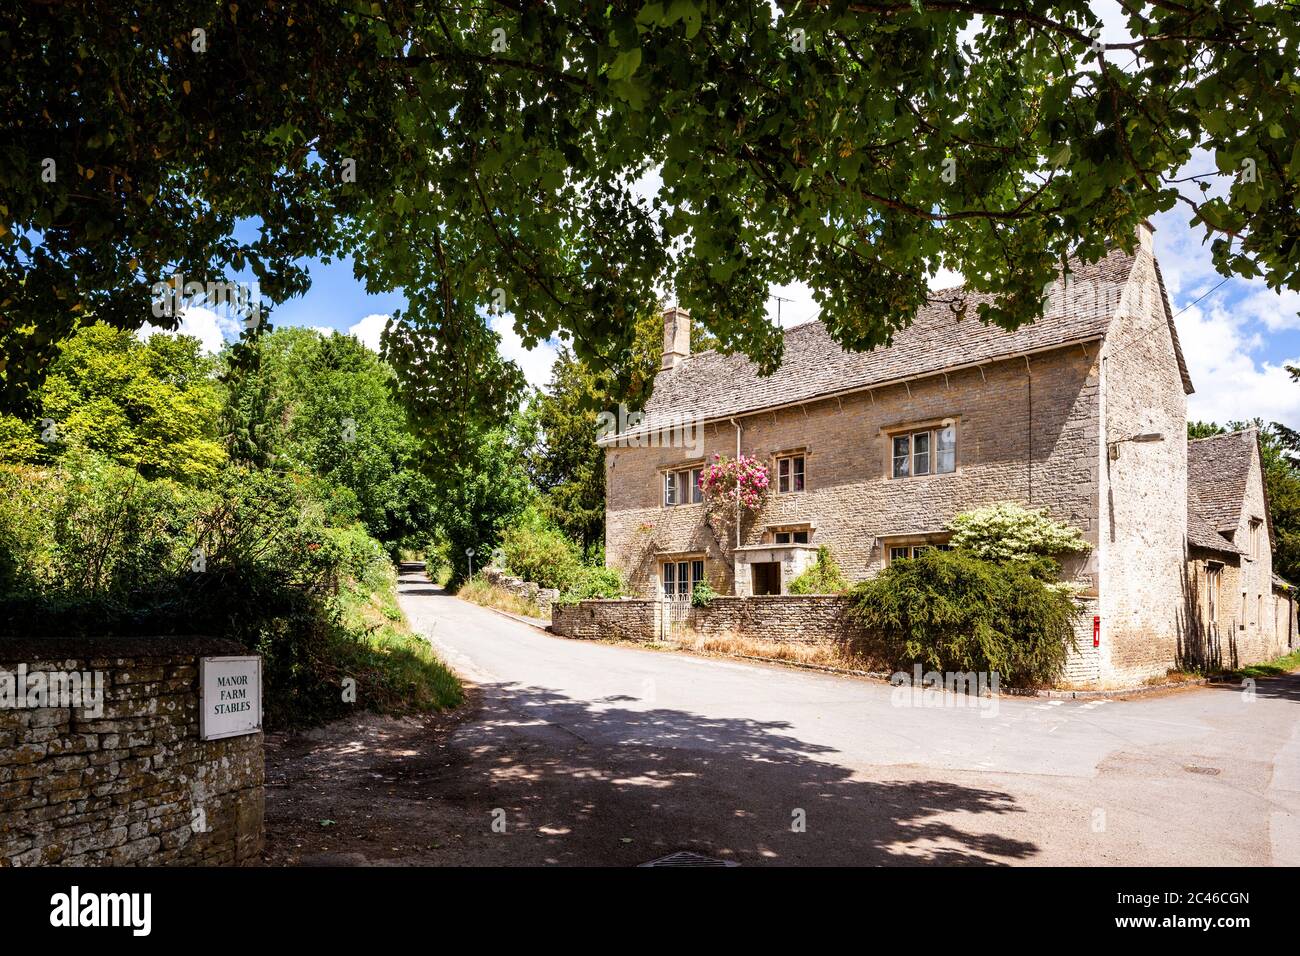 An 18th century (1790) stone house in the Cotswold village of Ablington, Gloucestershire UK Stock Photo